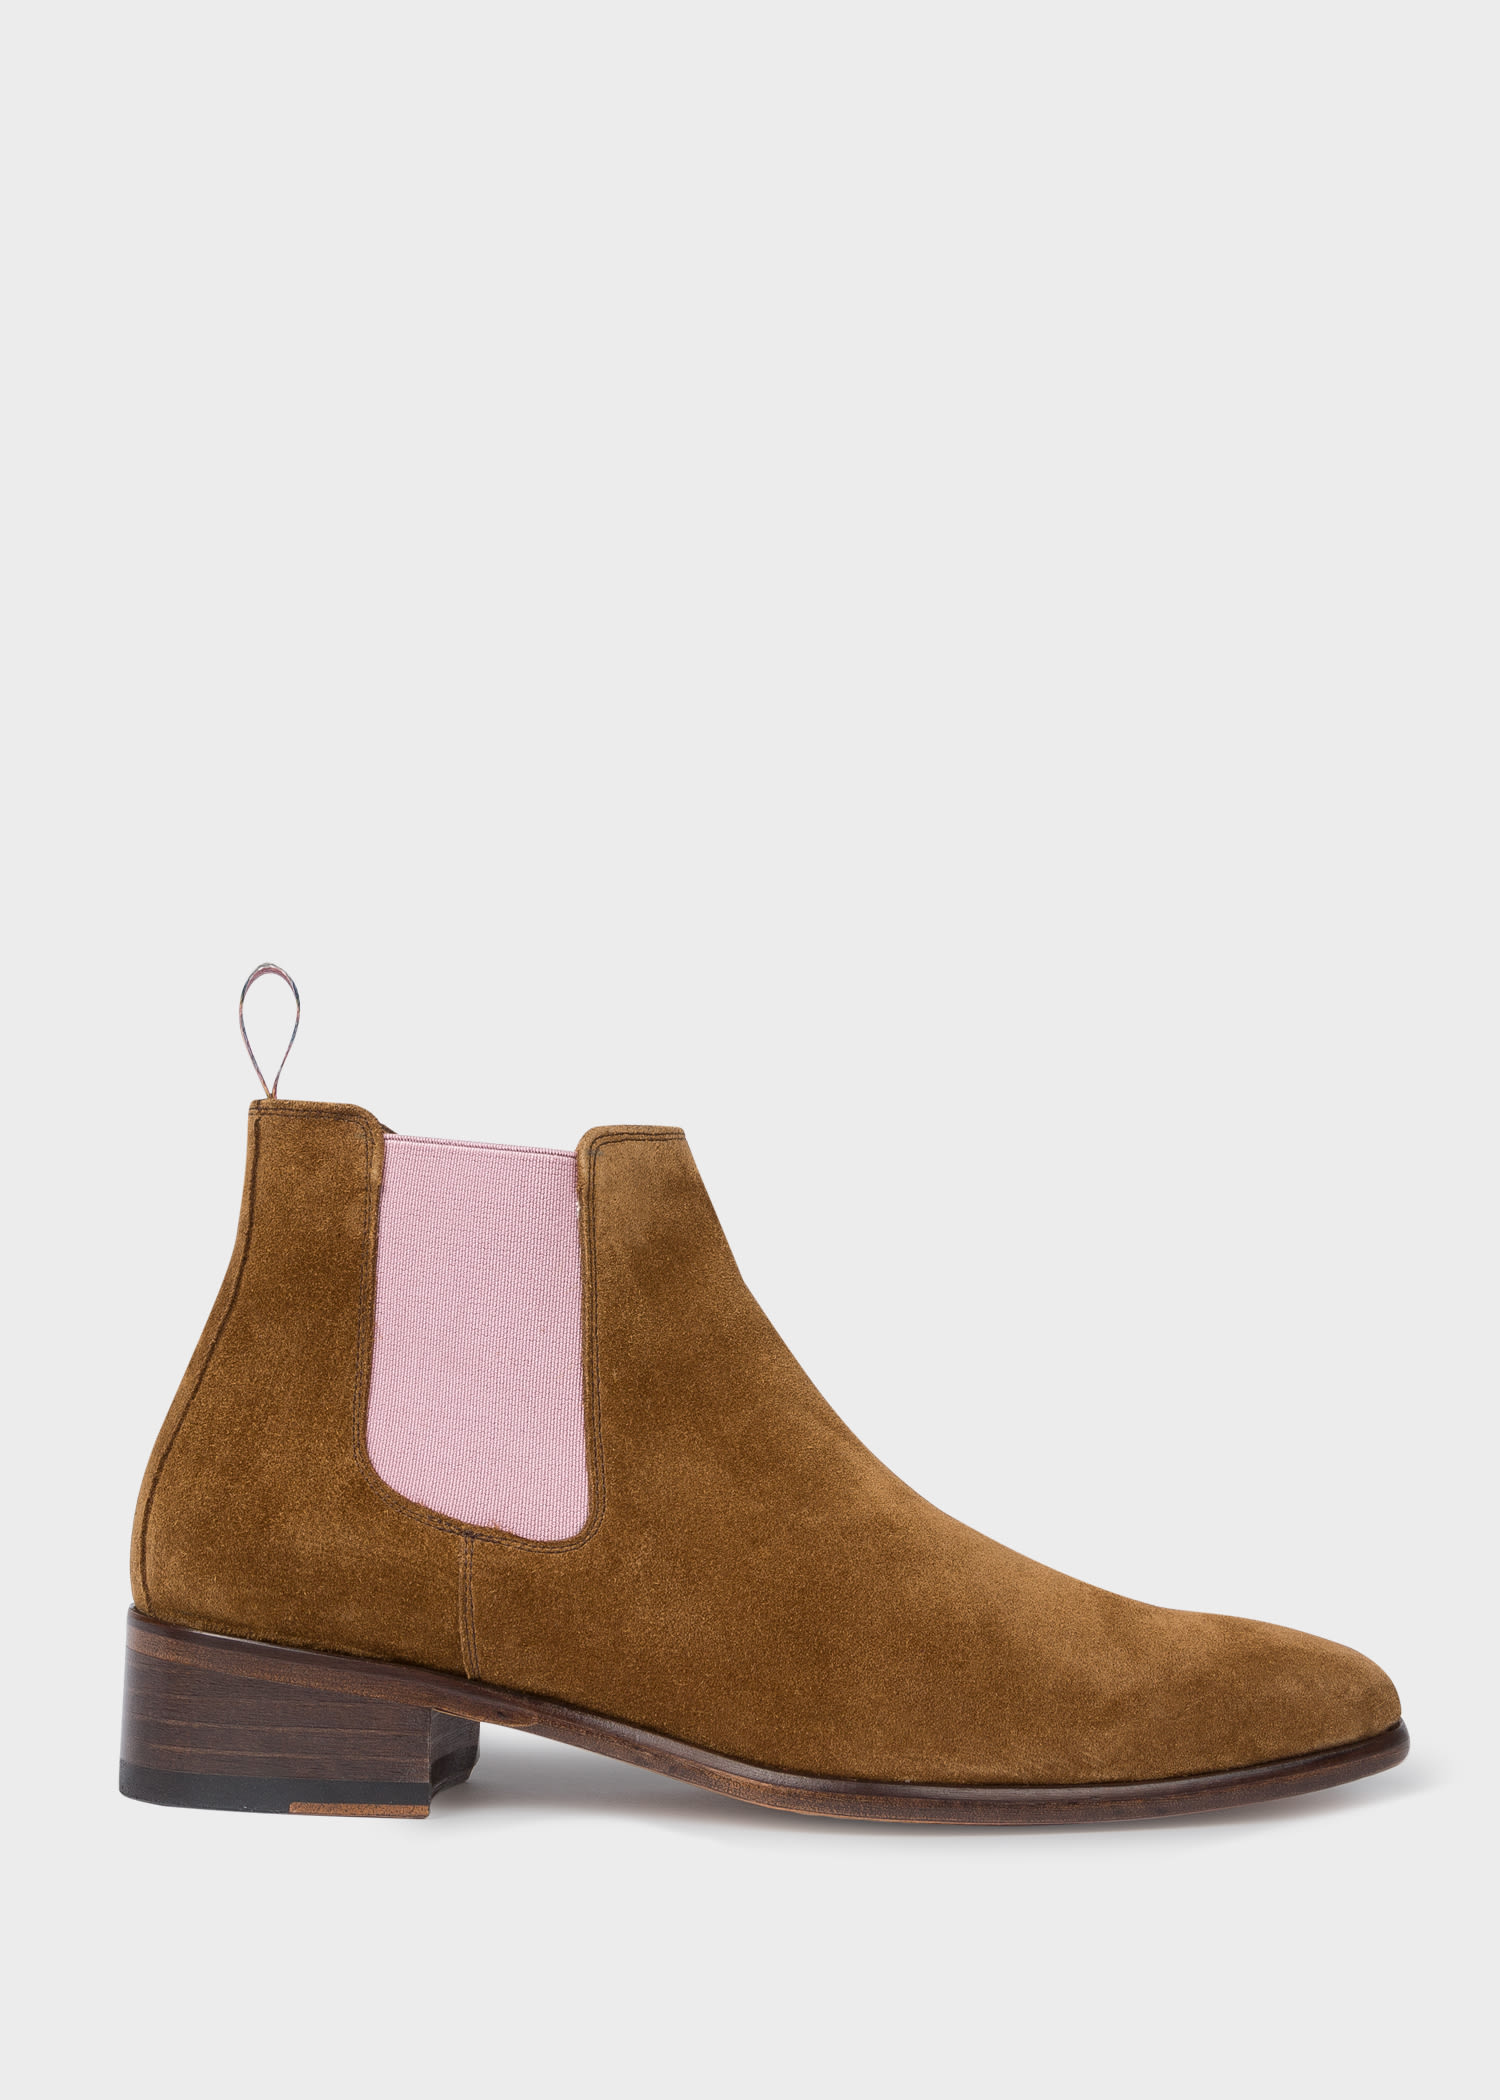 Women's Tan Suede Boots Paul Smith